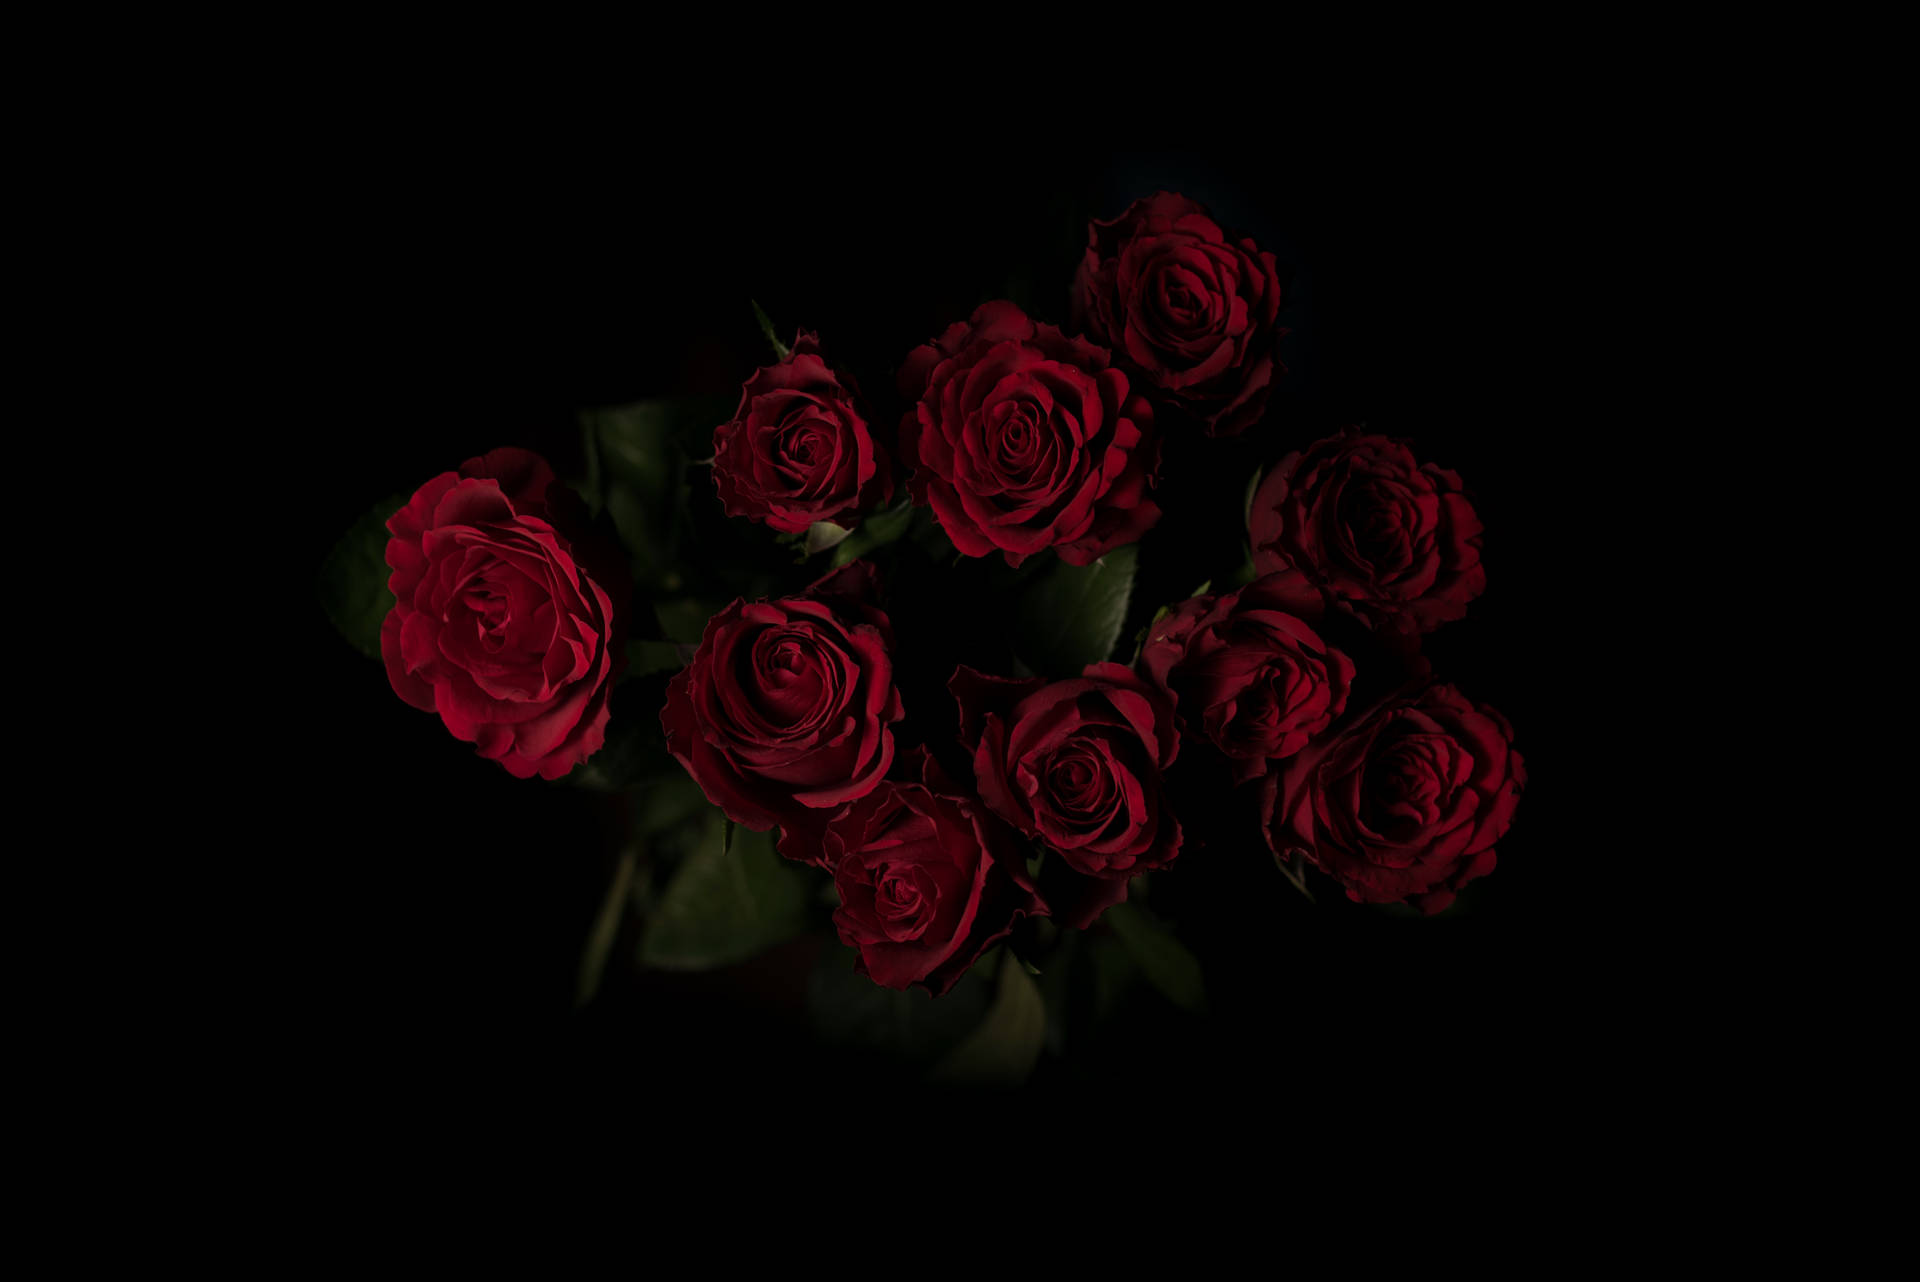 Dark Red 6016X4016 Wallpaper and Background Image